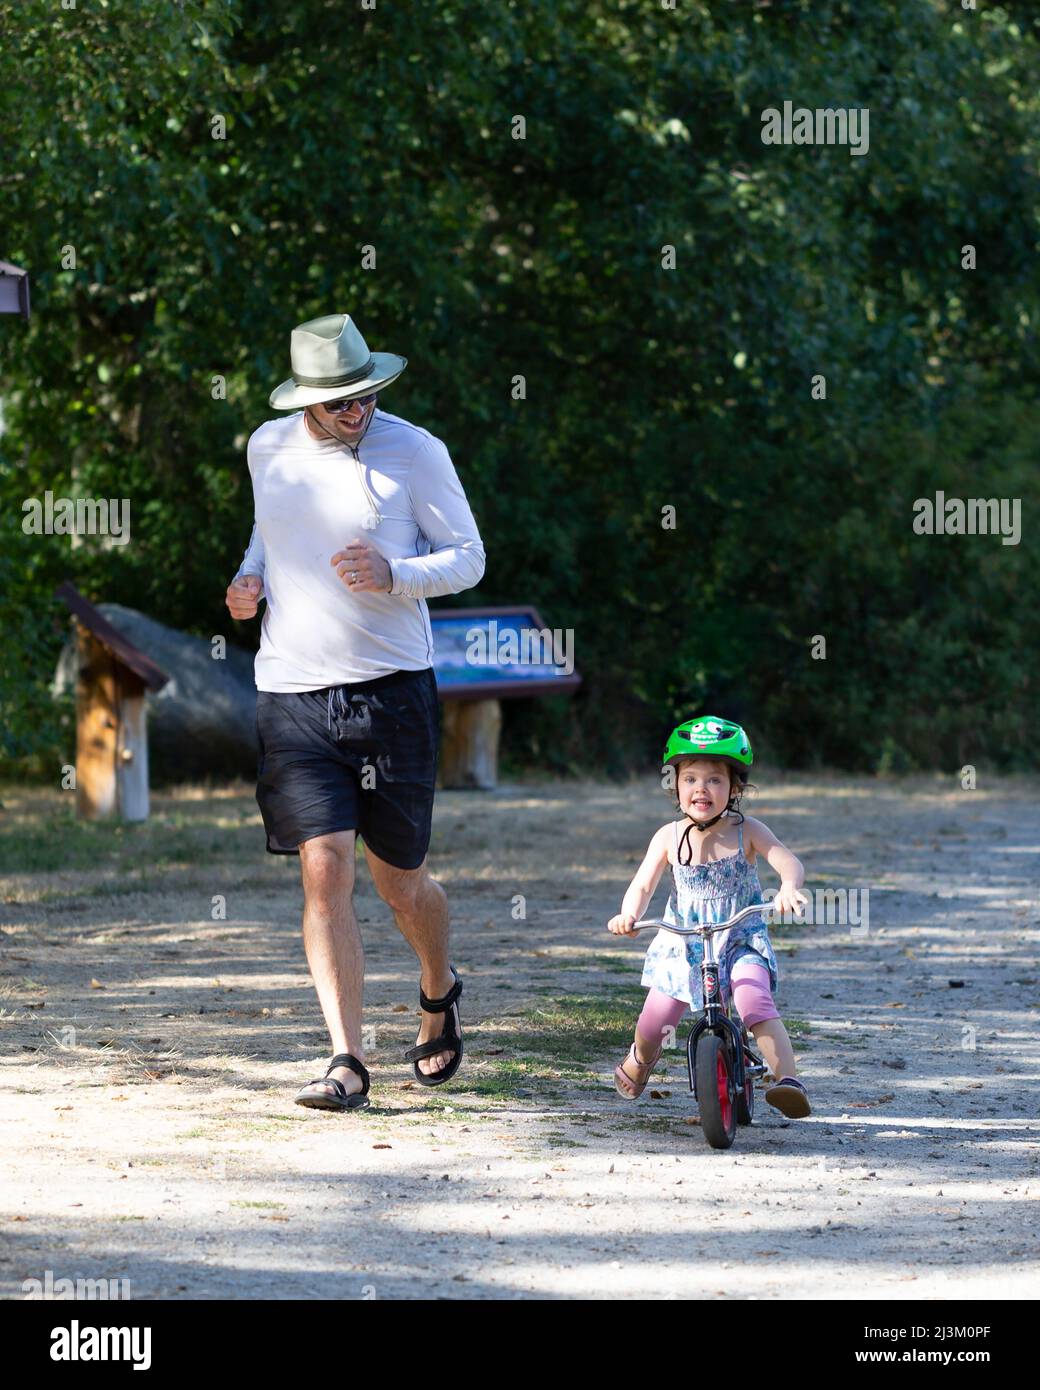 Father runs beside young daughter riding a glider bike; British Columbia, Canada Stock Photo